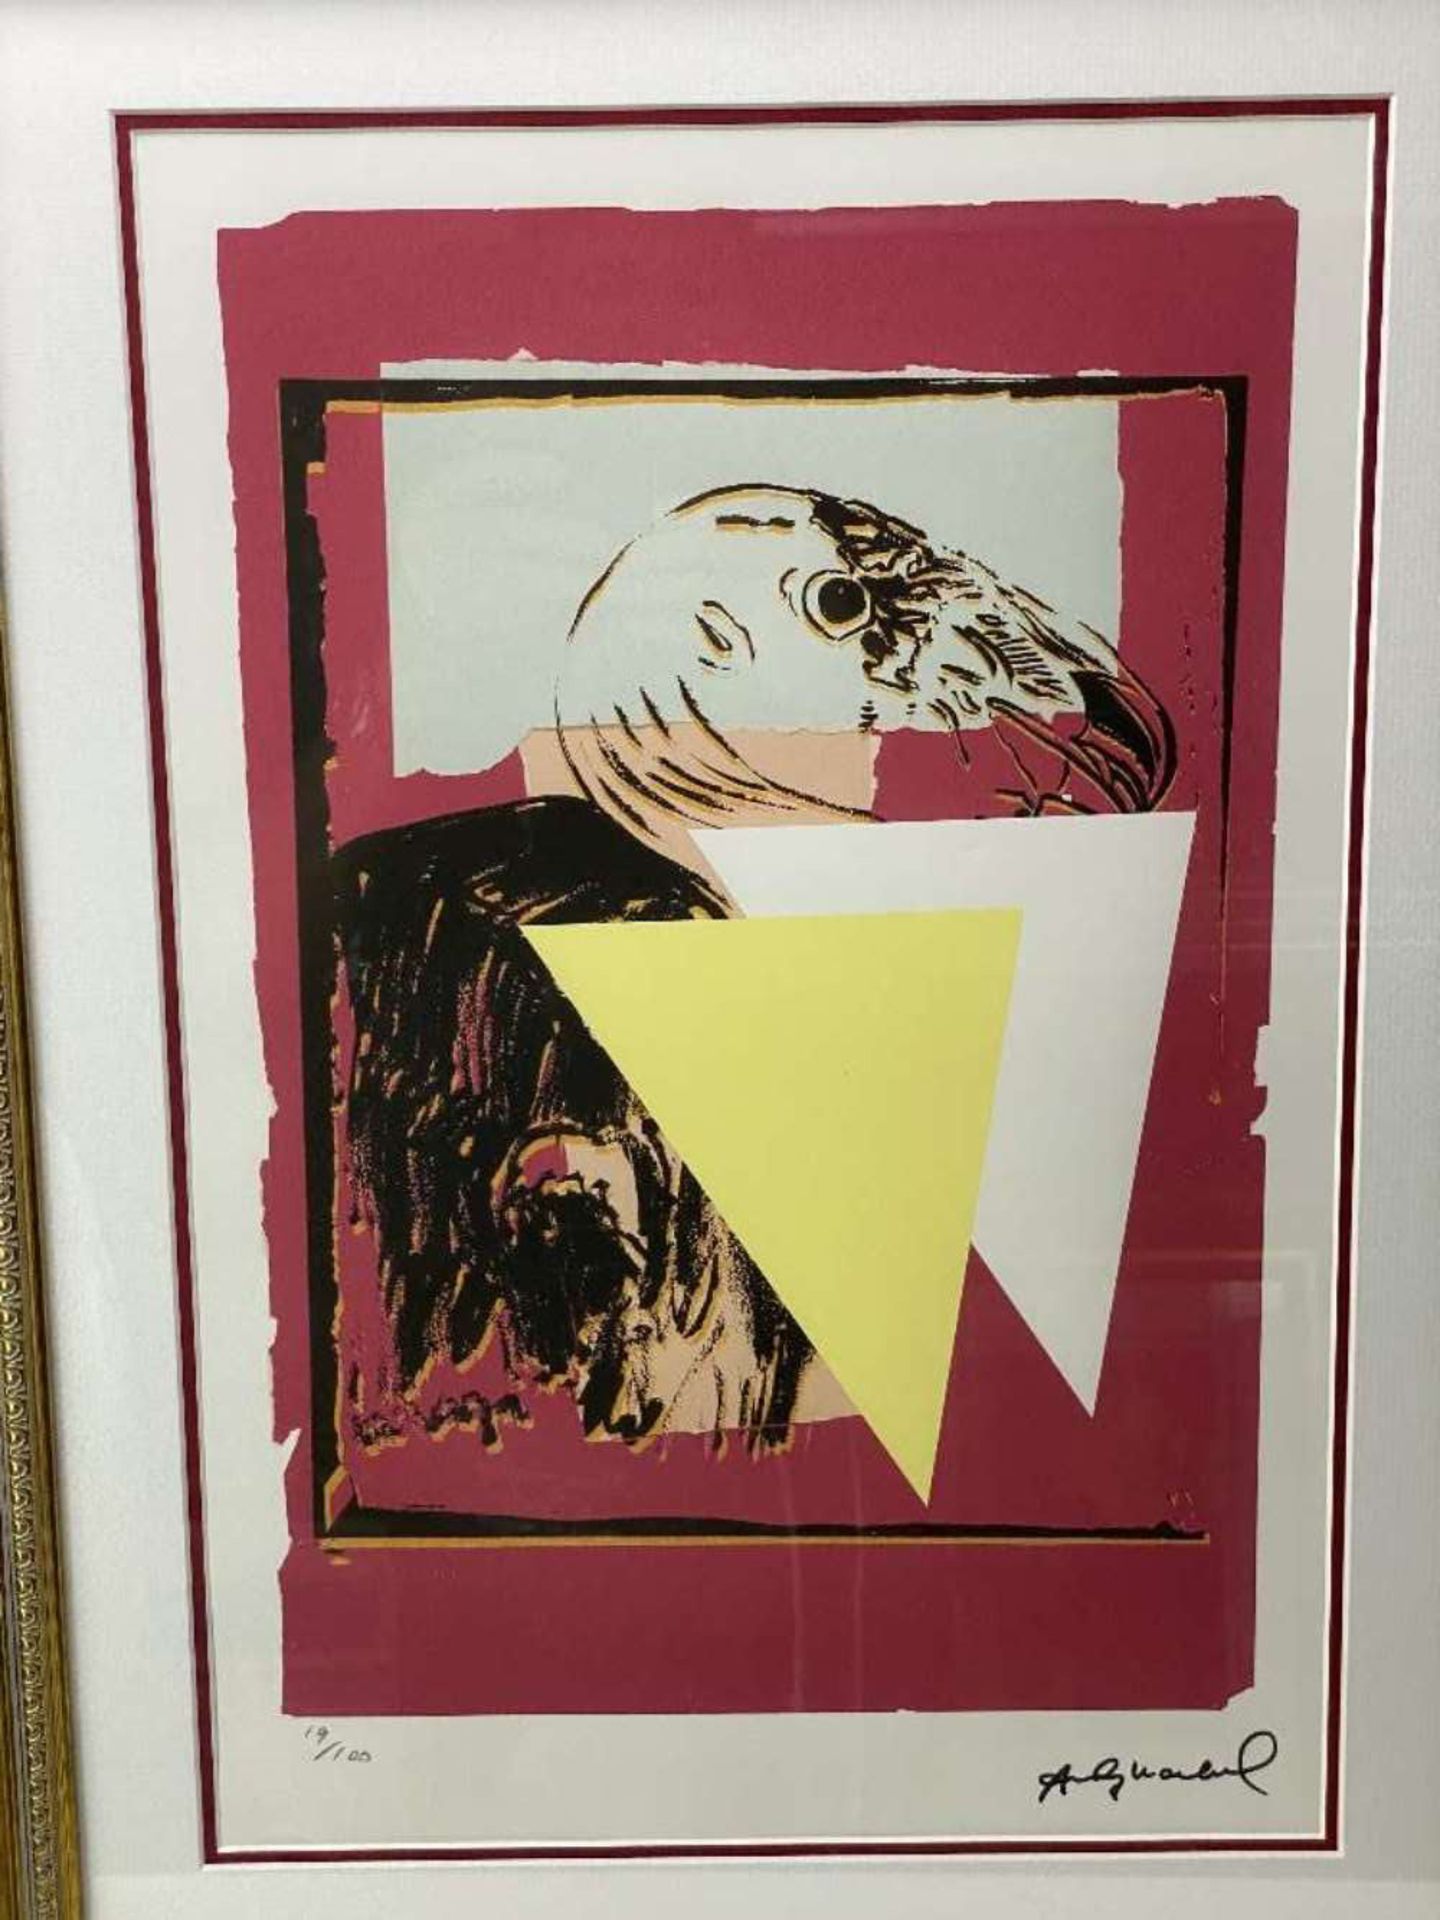 Andy Warhol-(1928-1987) "Albatross" Leo Castelli- New York Numbered Ltd Edition of #56/100 Lithogra - Image 2 of 4